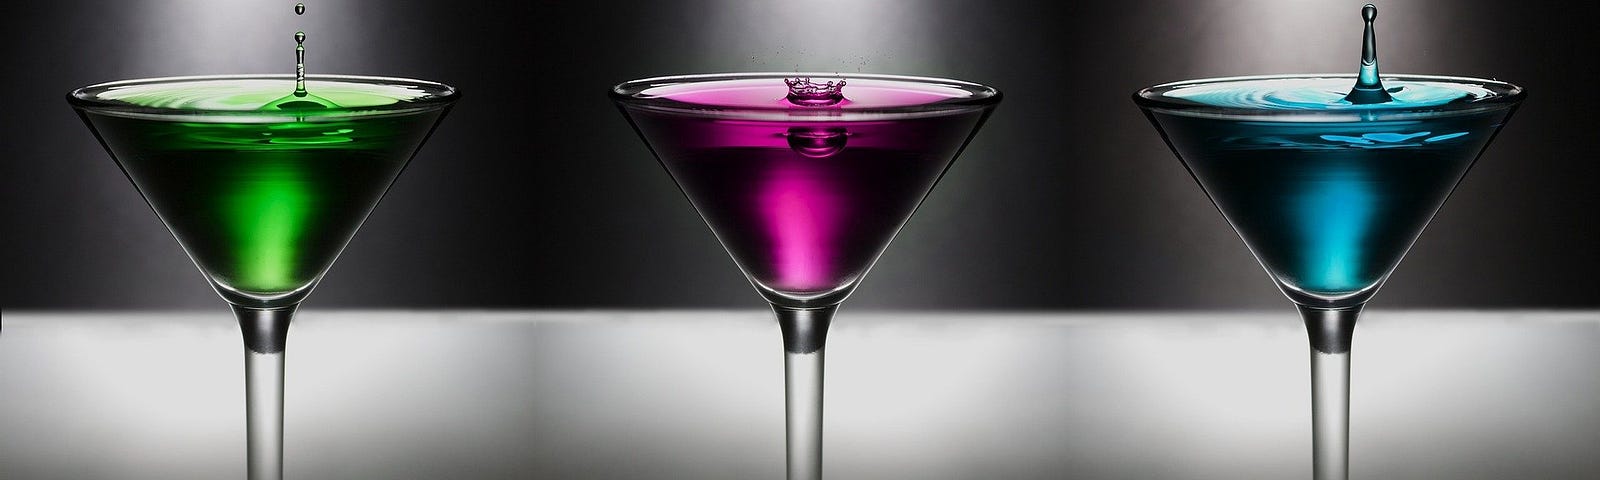 Three martini glasses side by side, filled with green, purple, and blue liquid respectively, on a gray background.